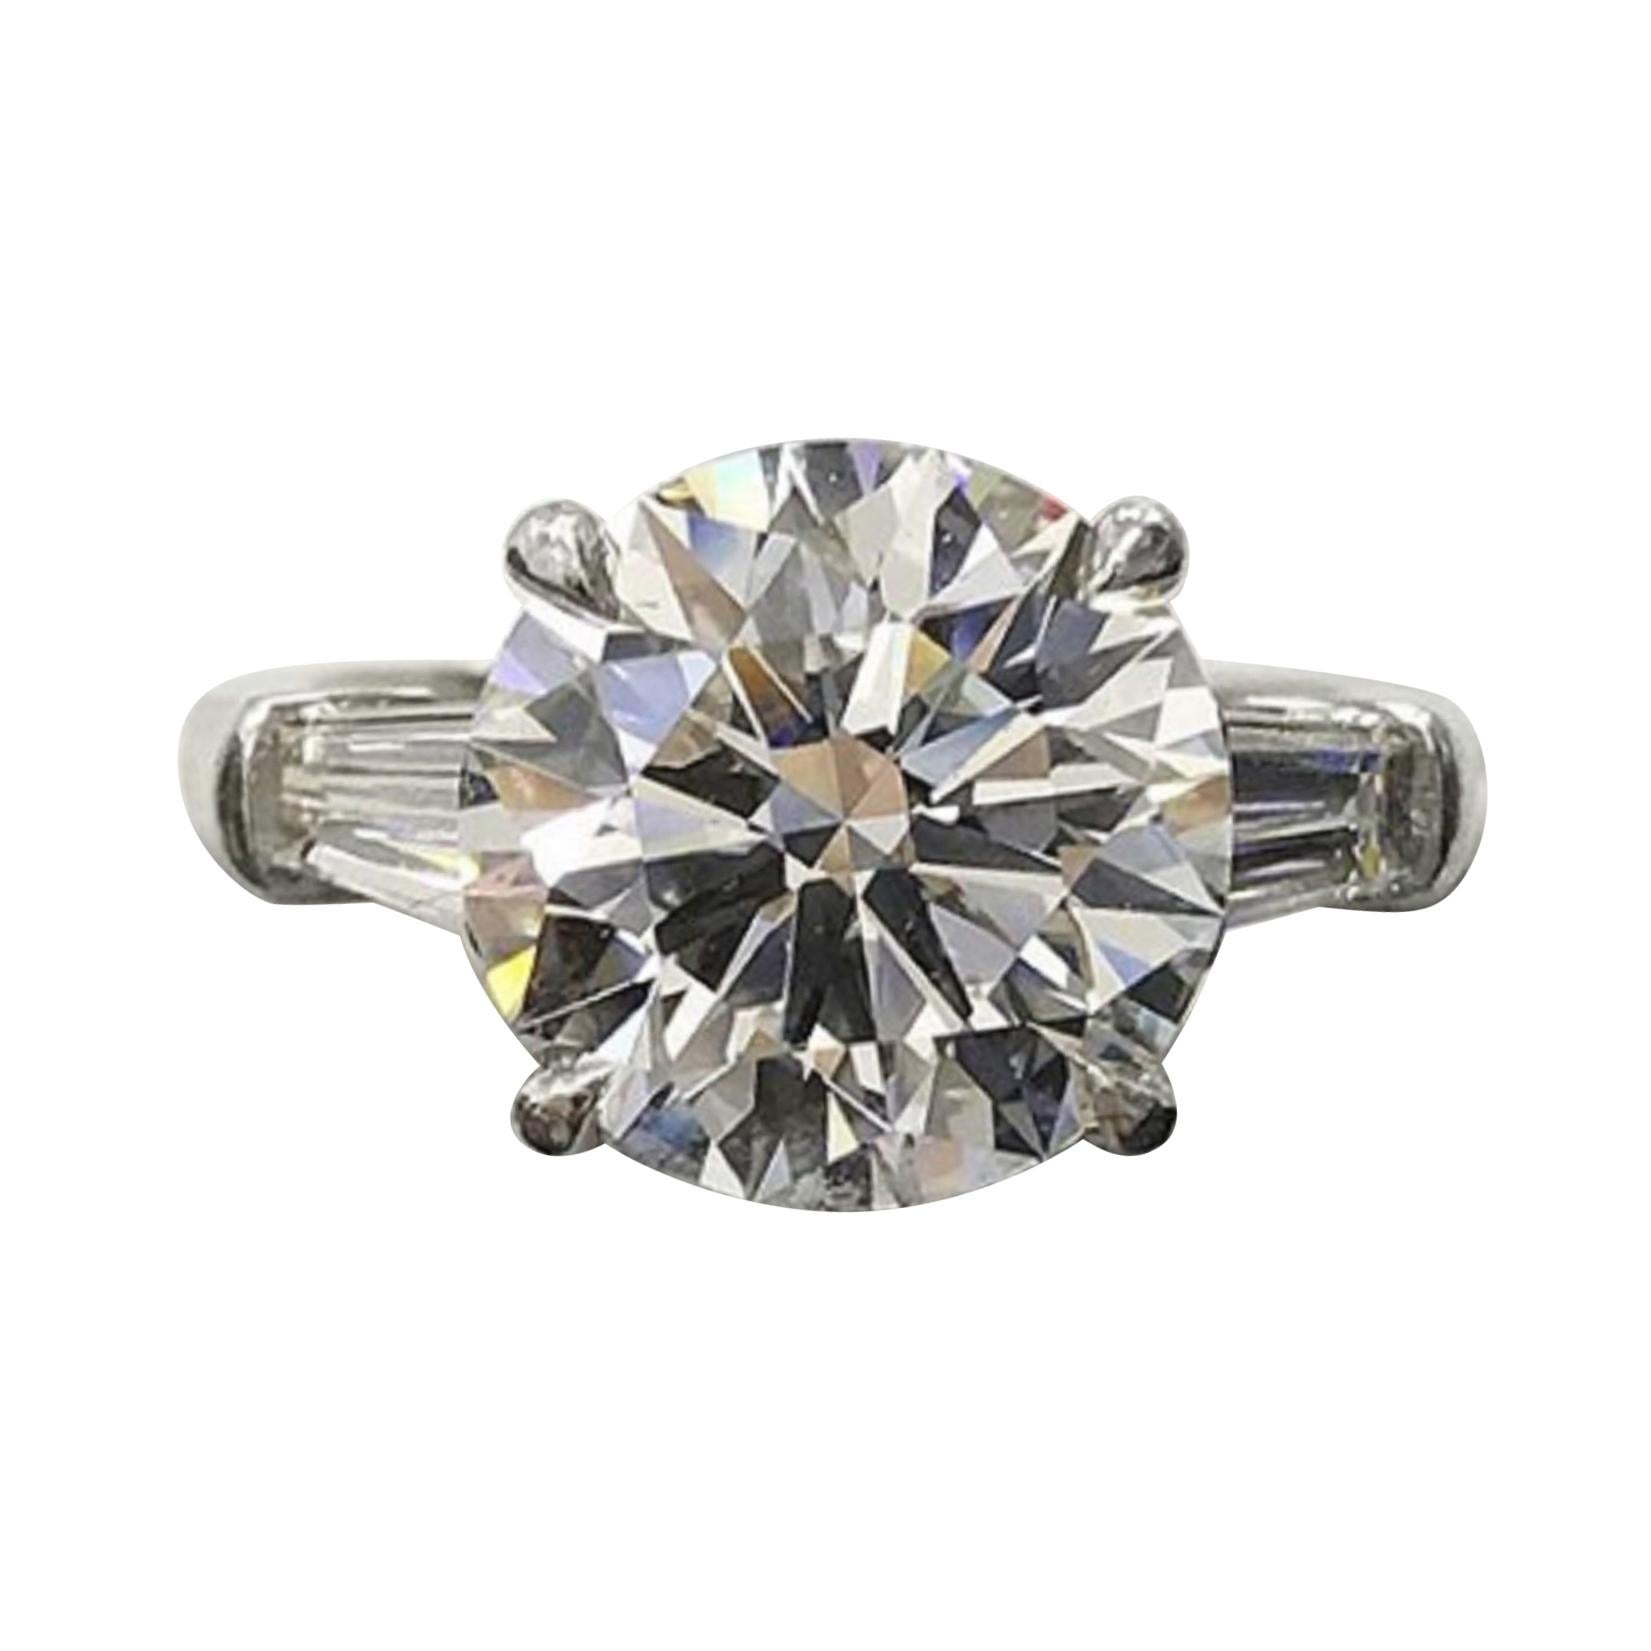 GIA Certified 7.75 Carat Diamond Solitaire Ring